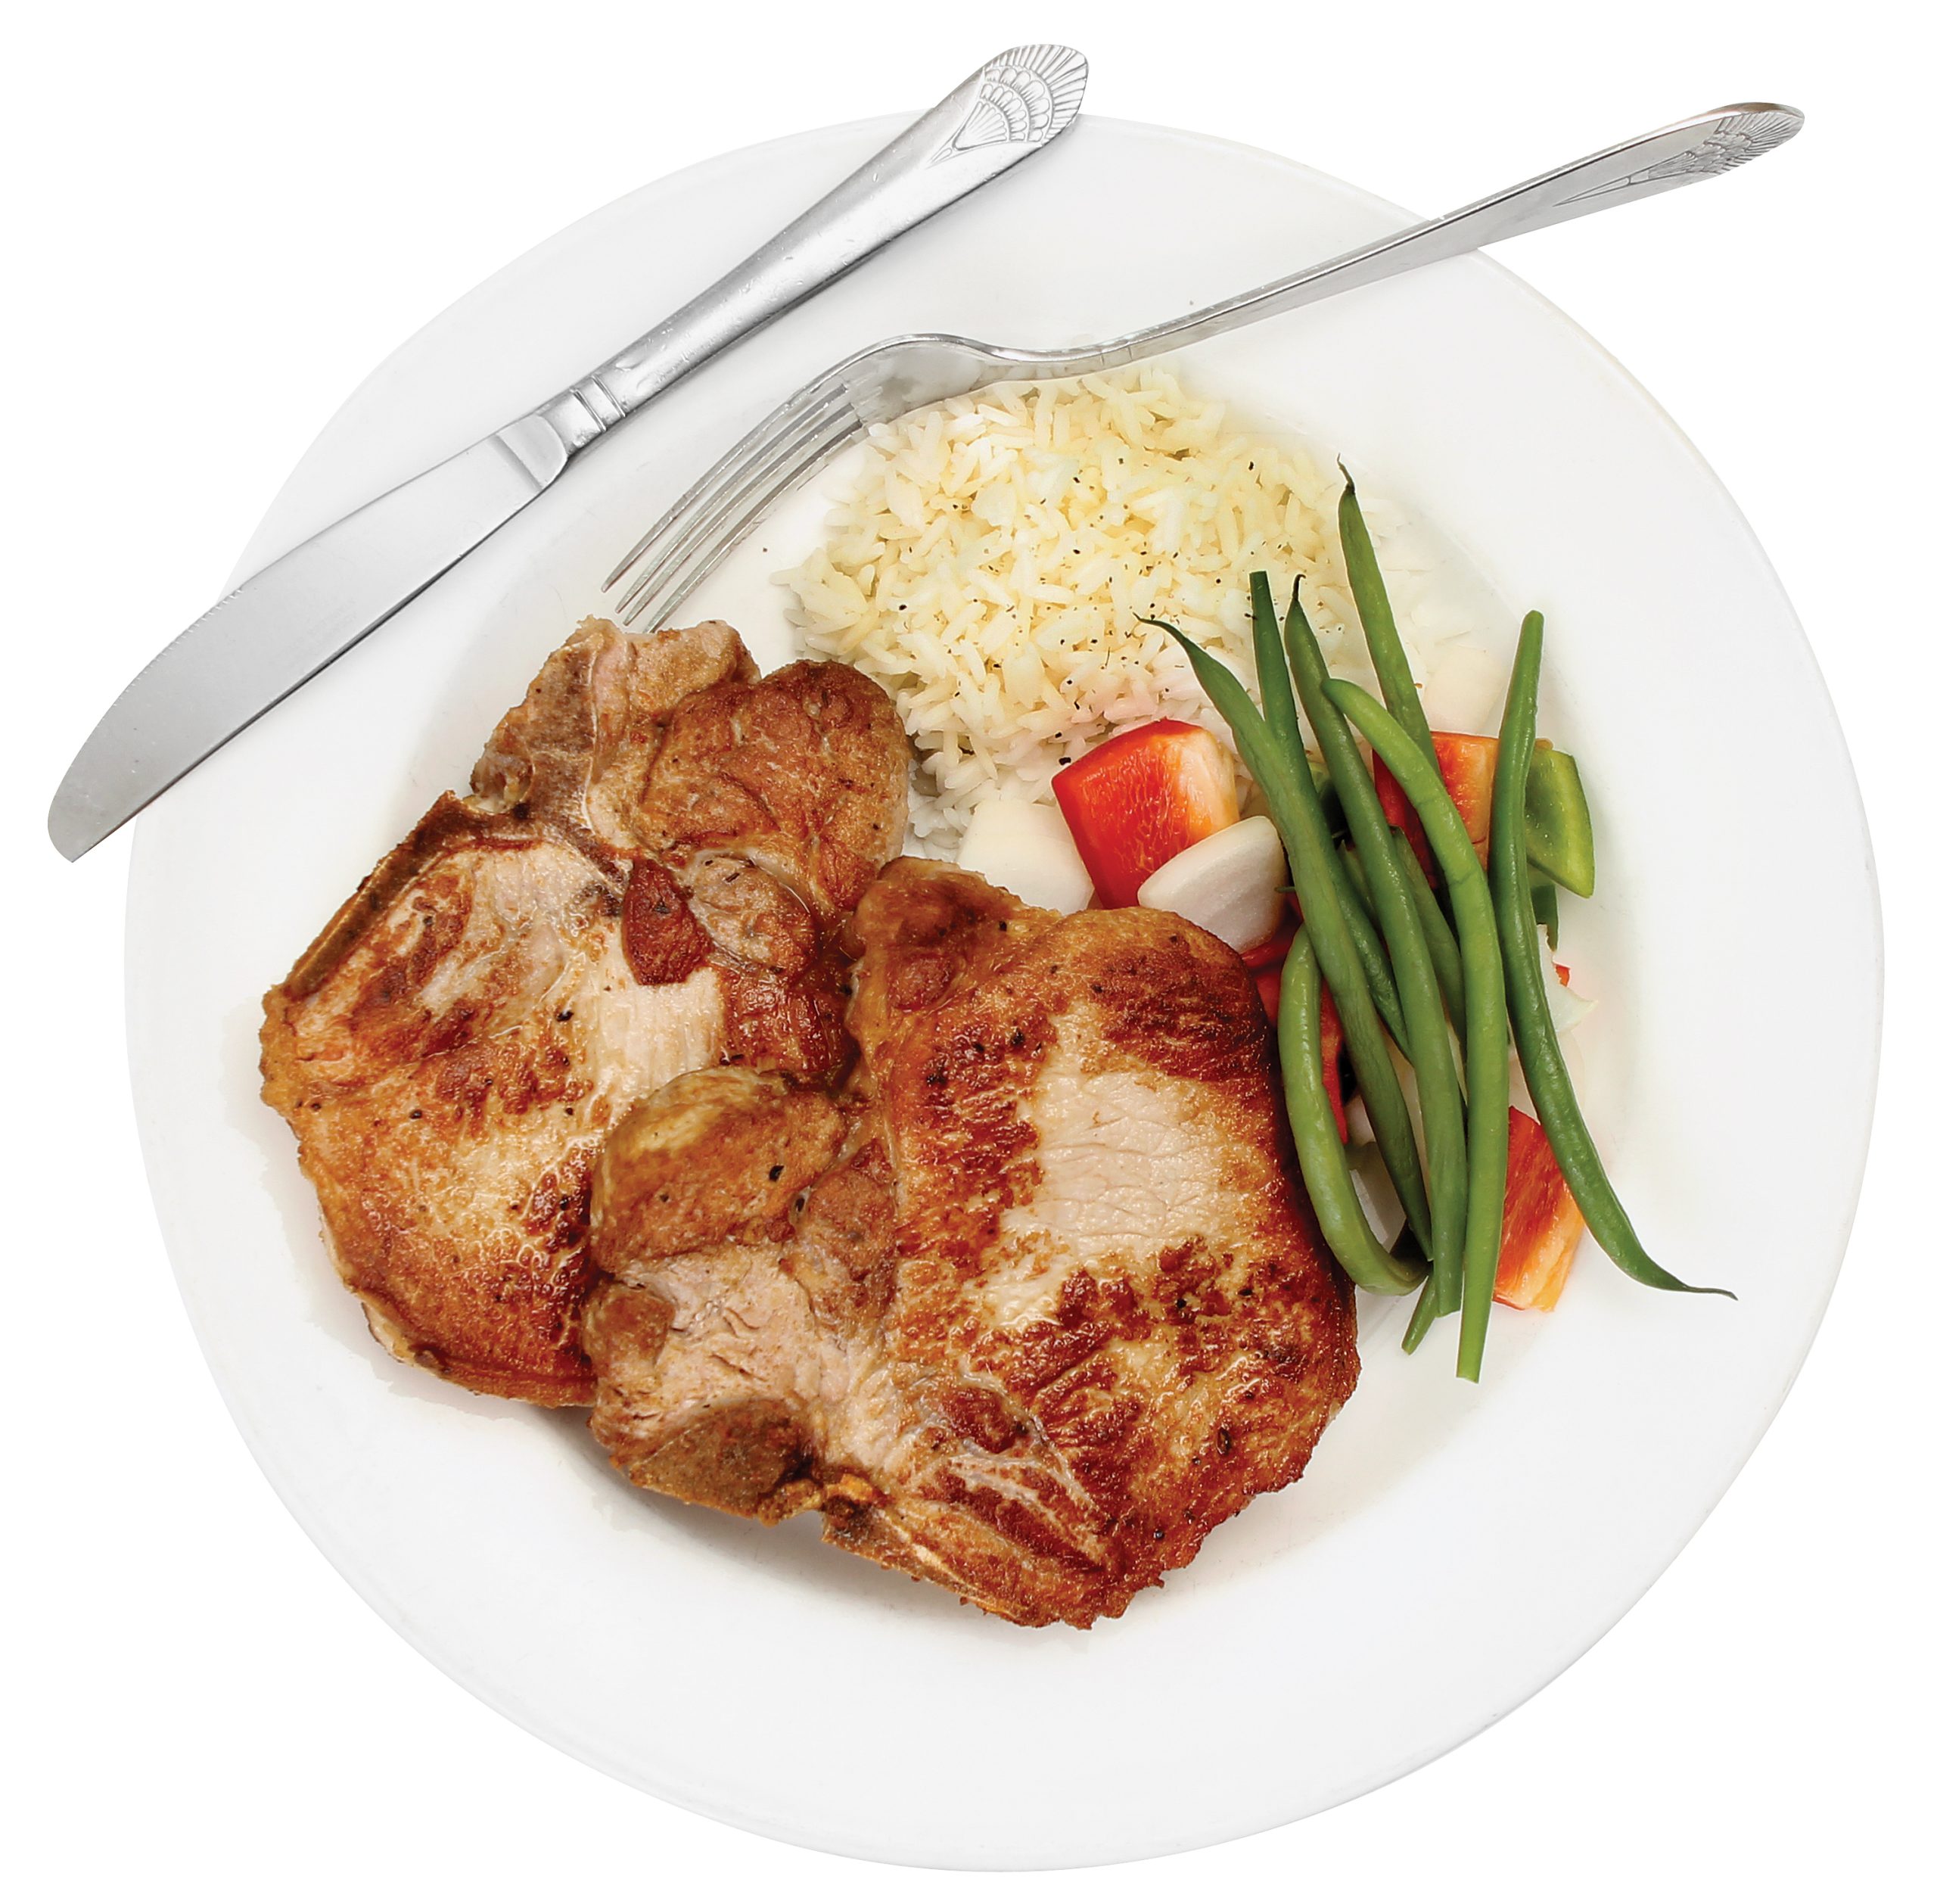 Pork Chop on a Plate with Rice and Veggies Food Picture